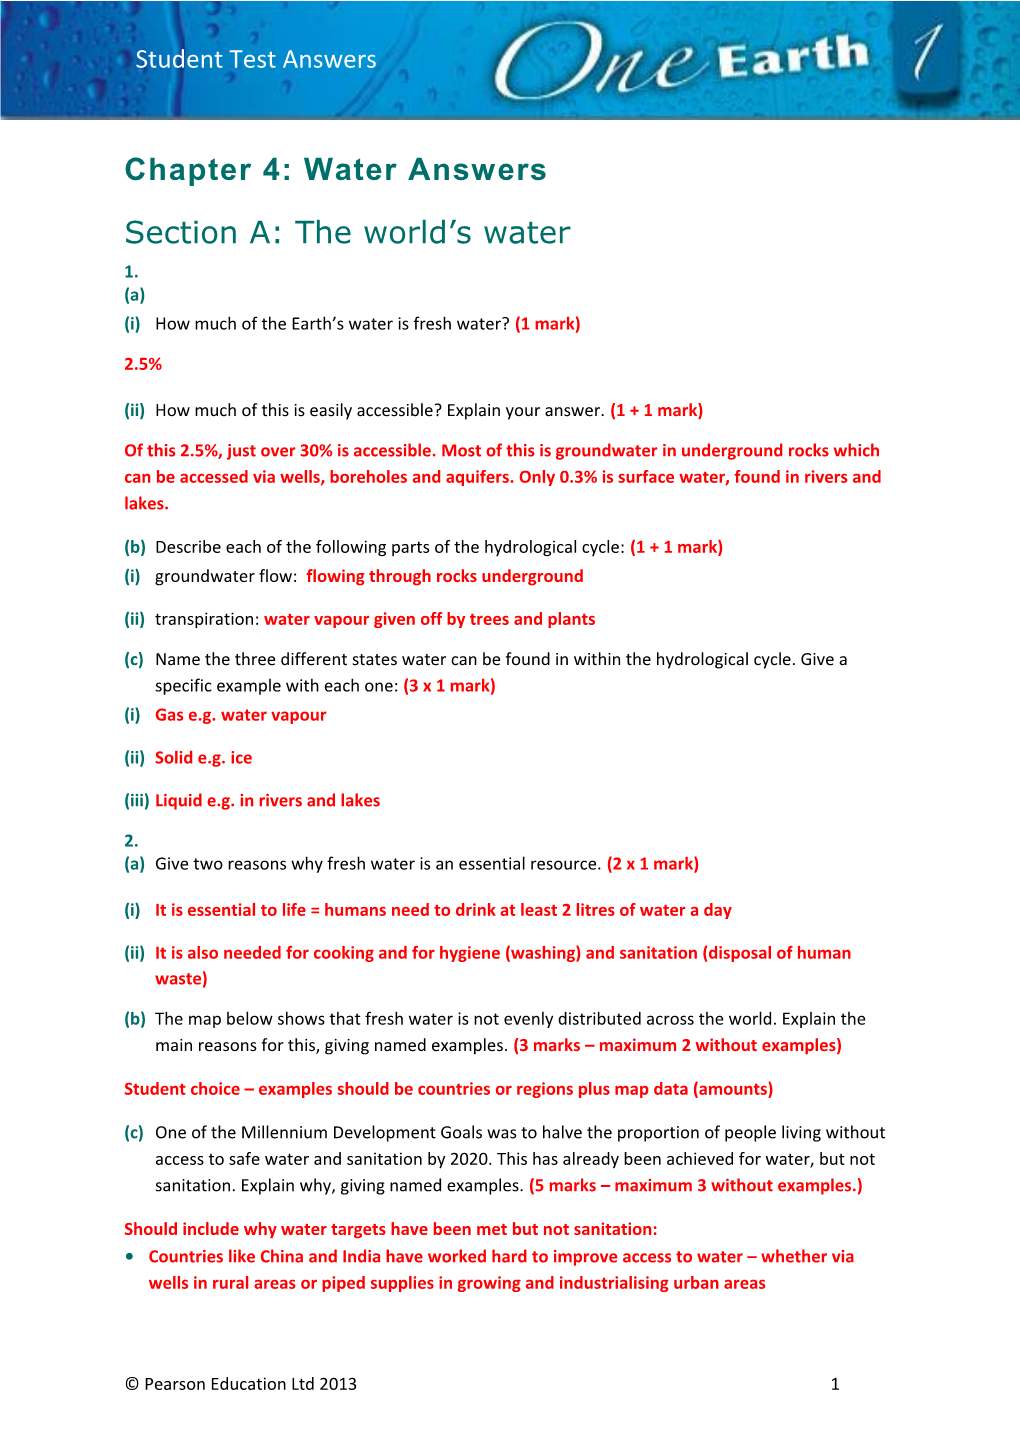 Chapter 4: Water Answers